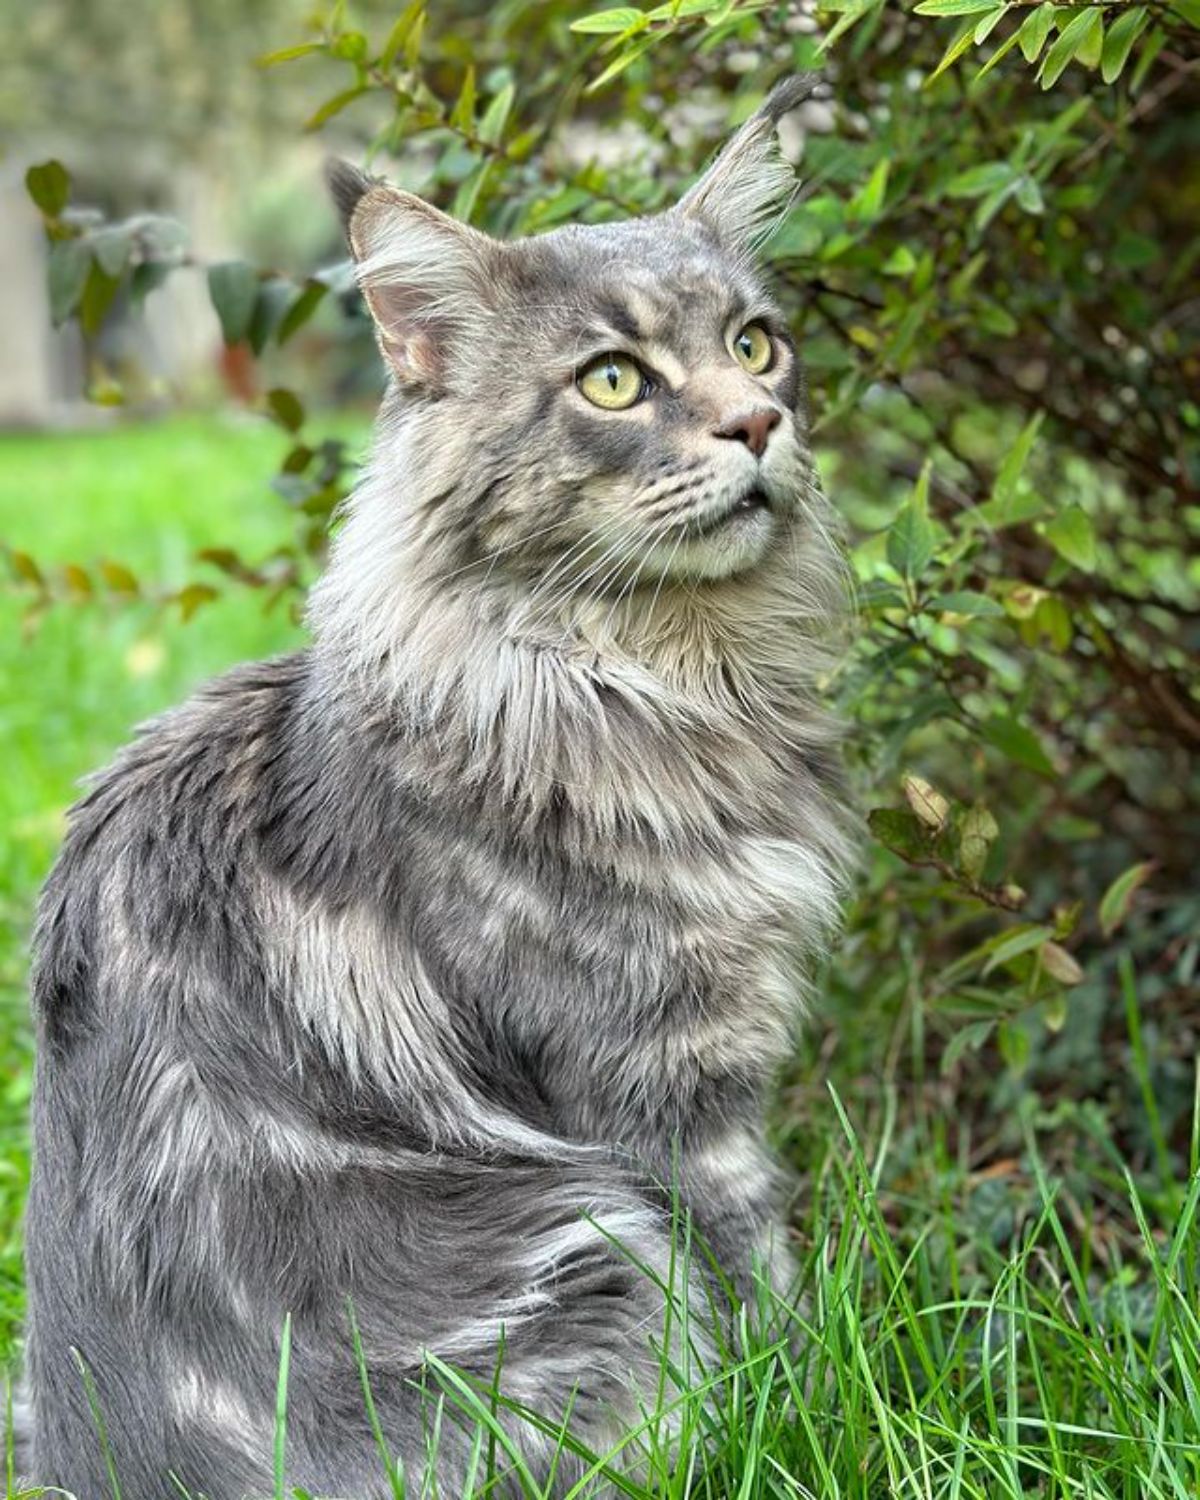 A fluffy tabby maine coon sitting in a grass.